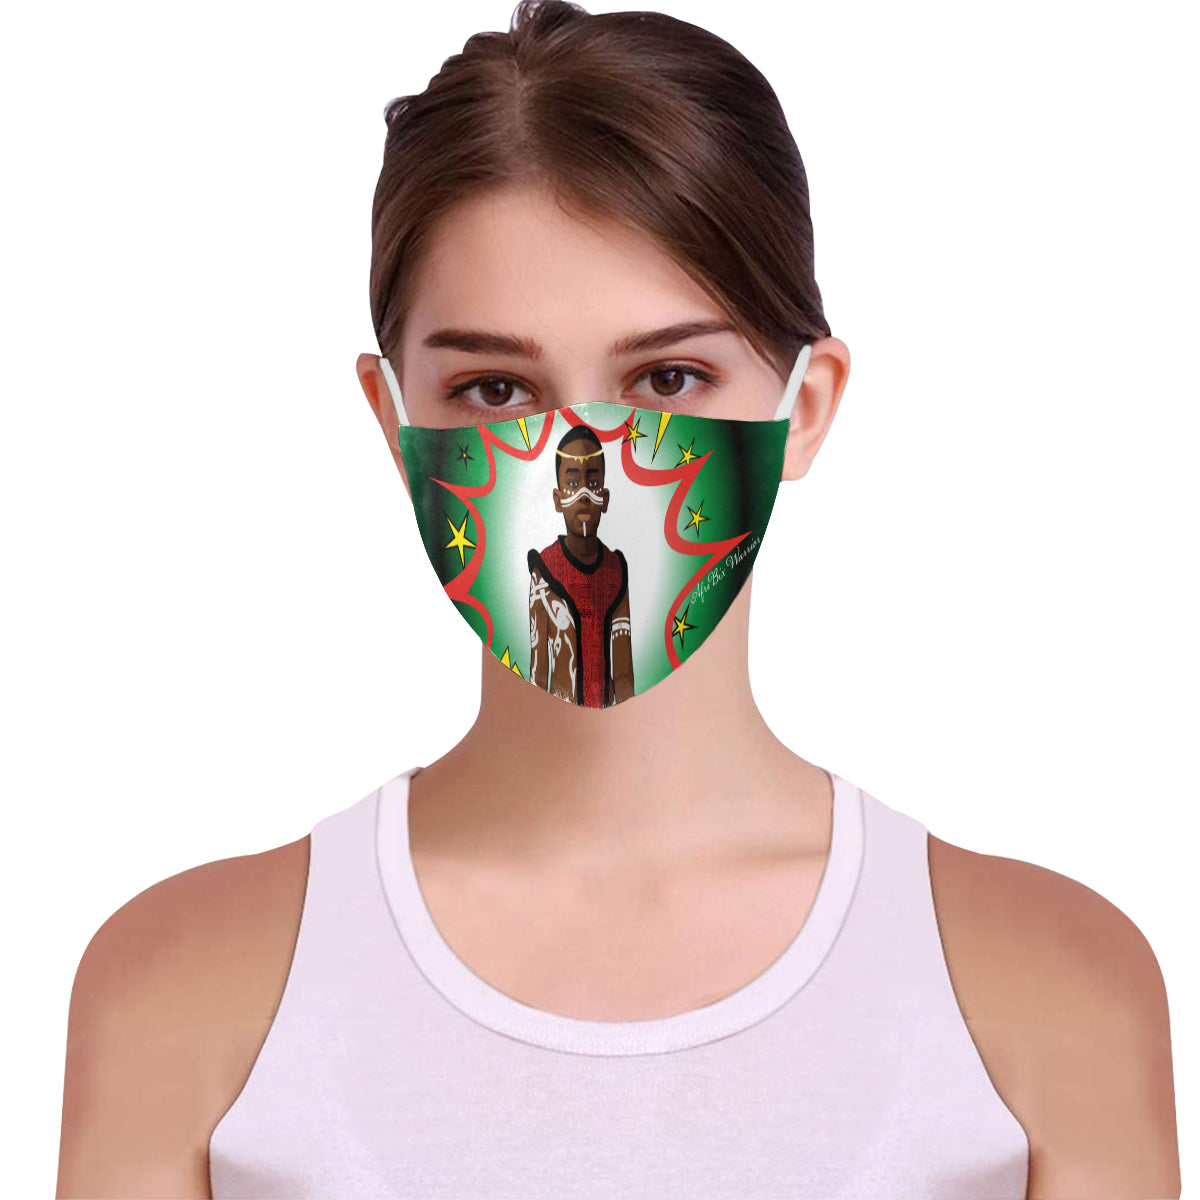 AfriBix Warrior Prince Cotton Fabric Face Mask with Filter Slot & Adjustable Strap (Pack of 5) - Non-medical use